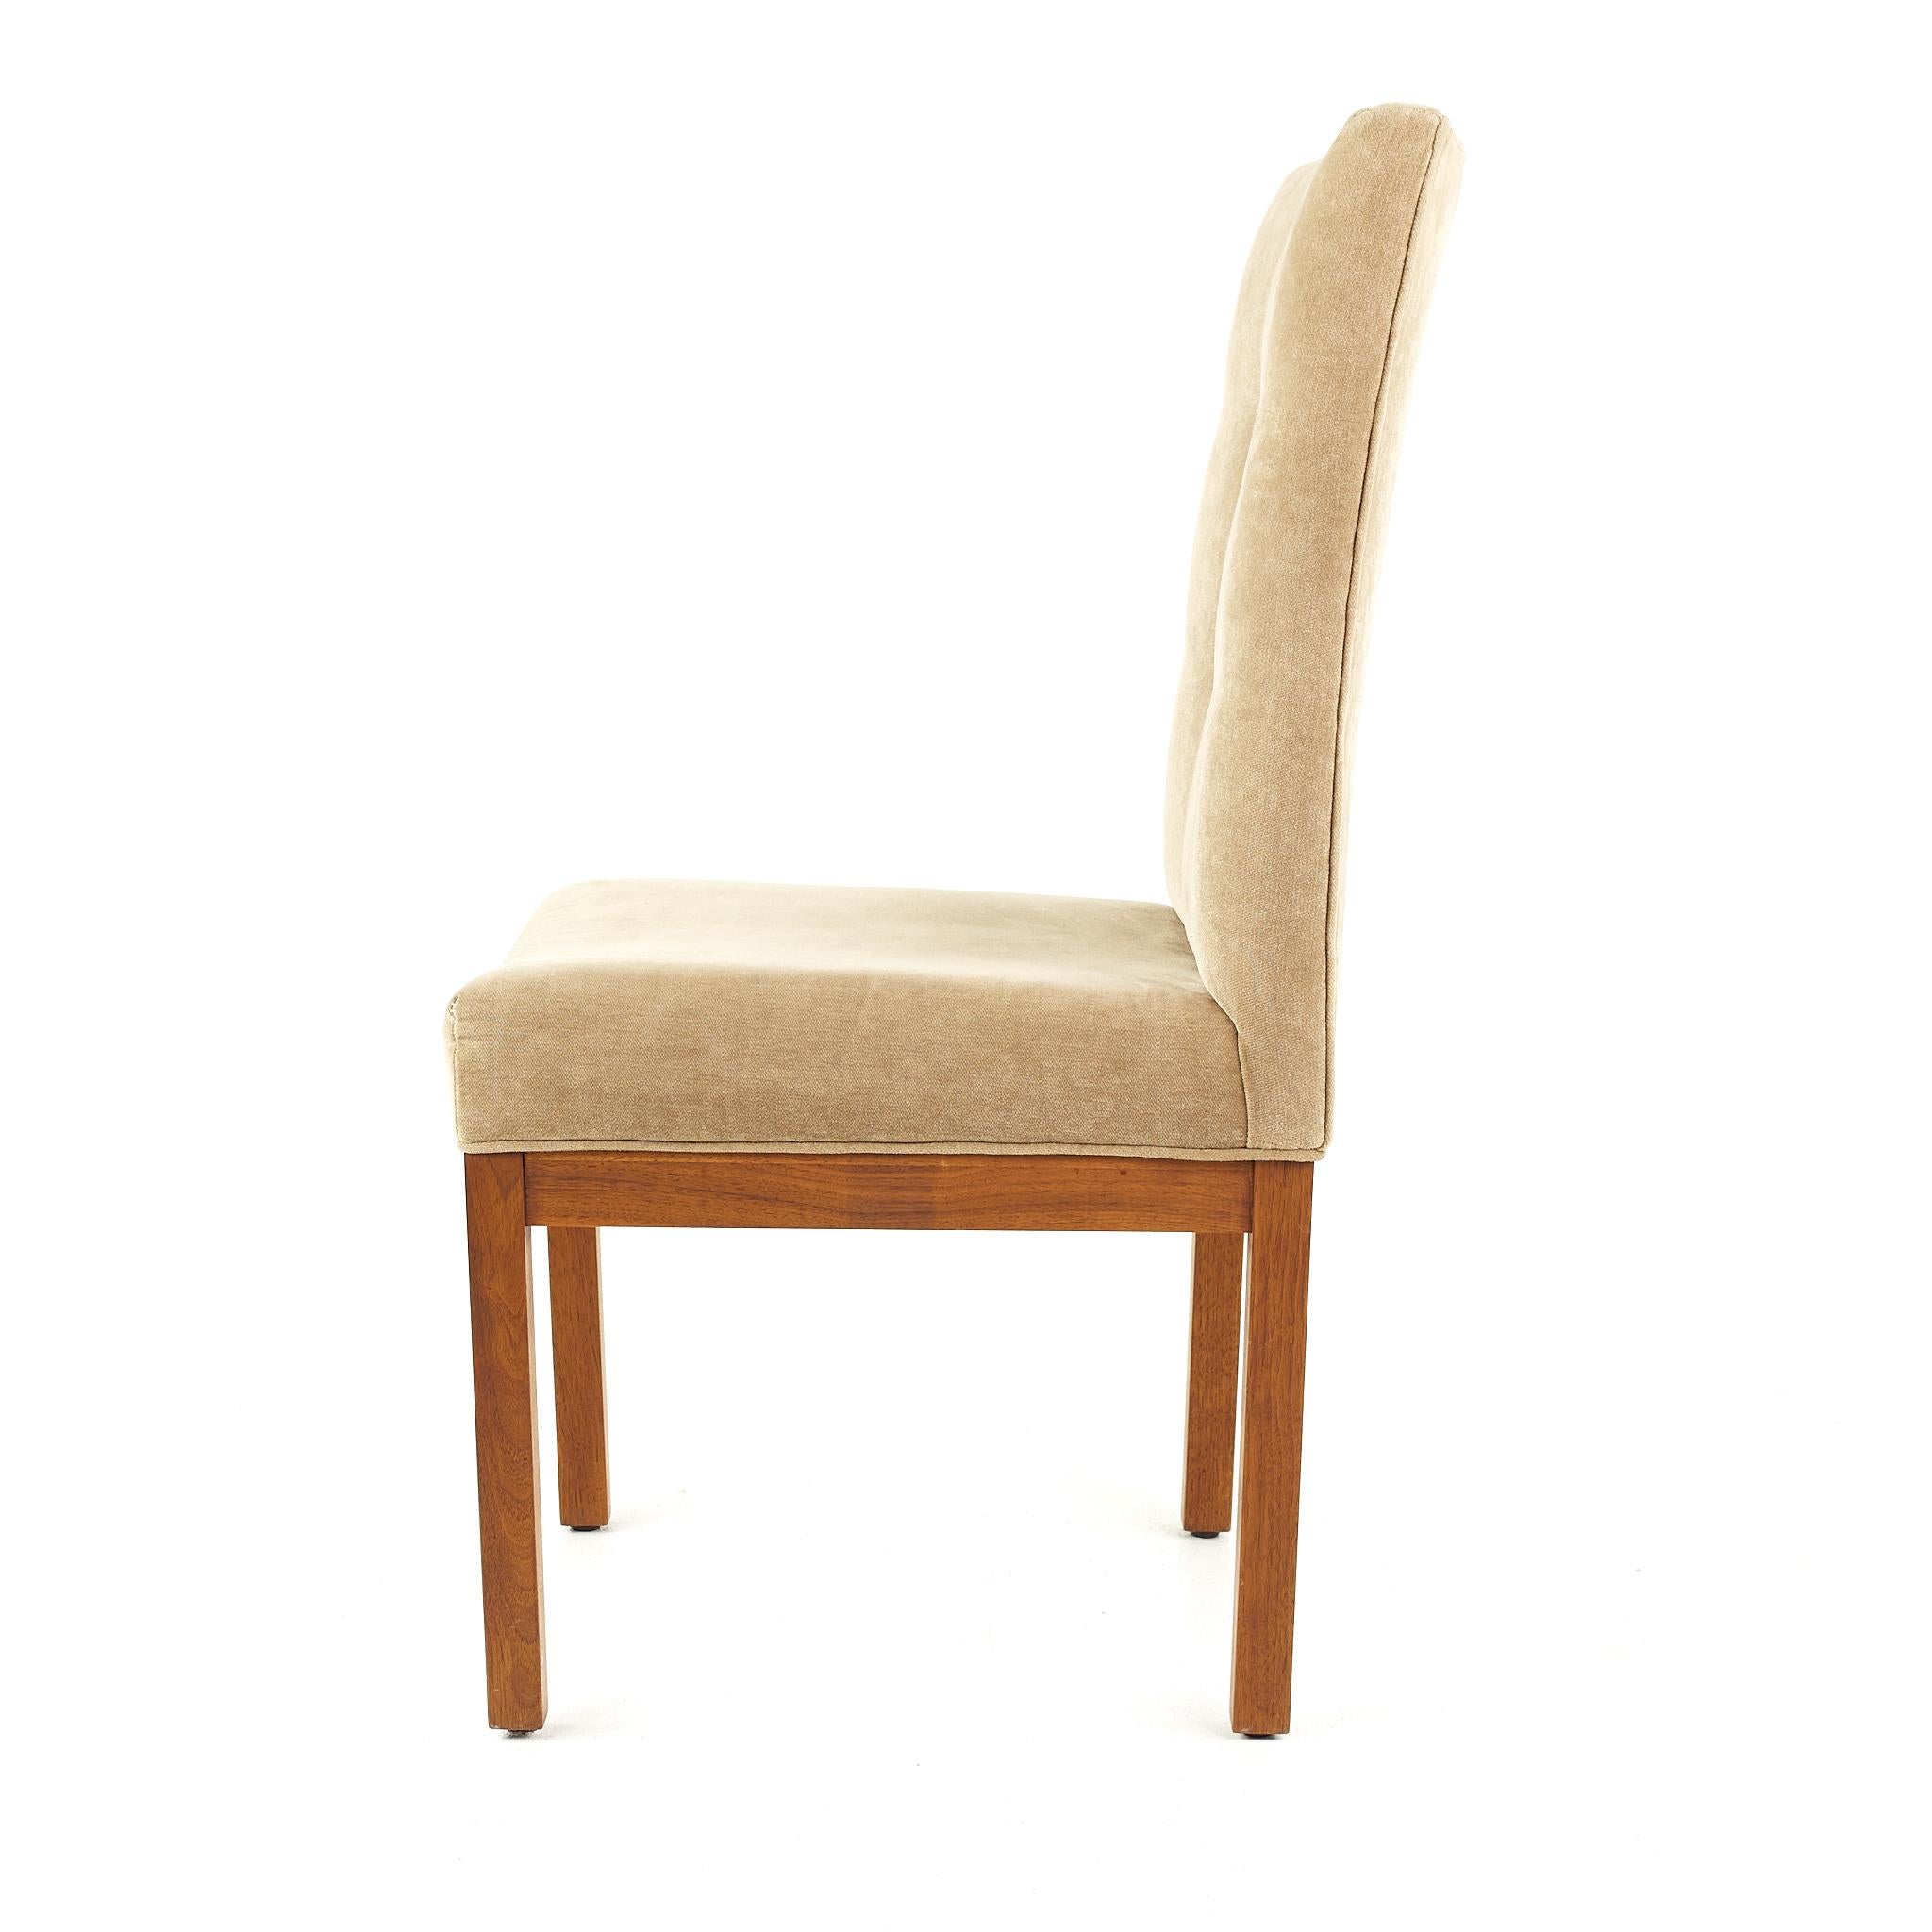 Late 20th Century Dillingham Mid Century Walnut Tufted Dining Chairs, Set of 4 For Sale